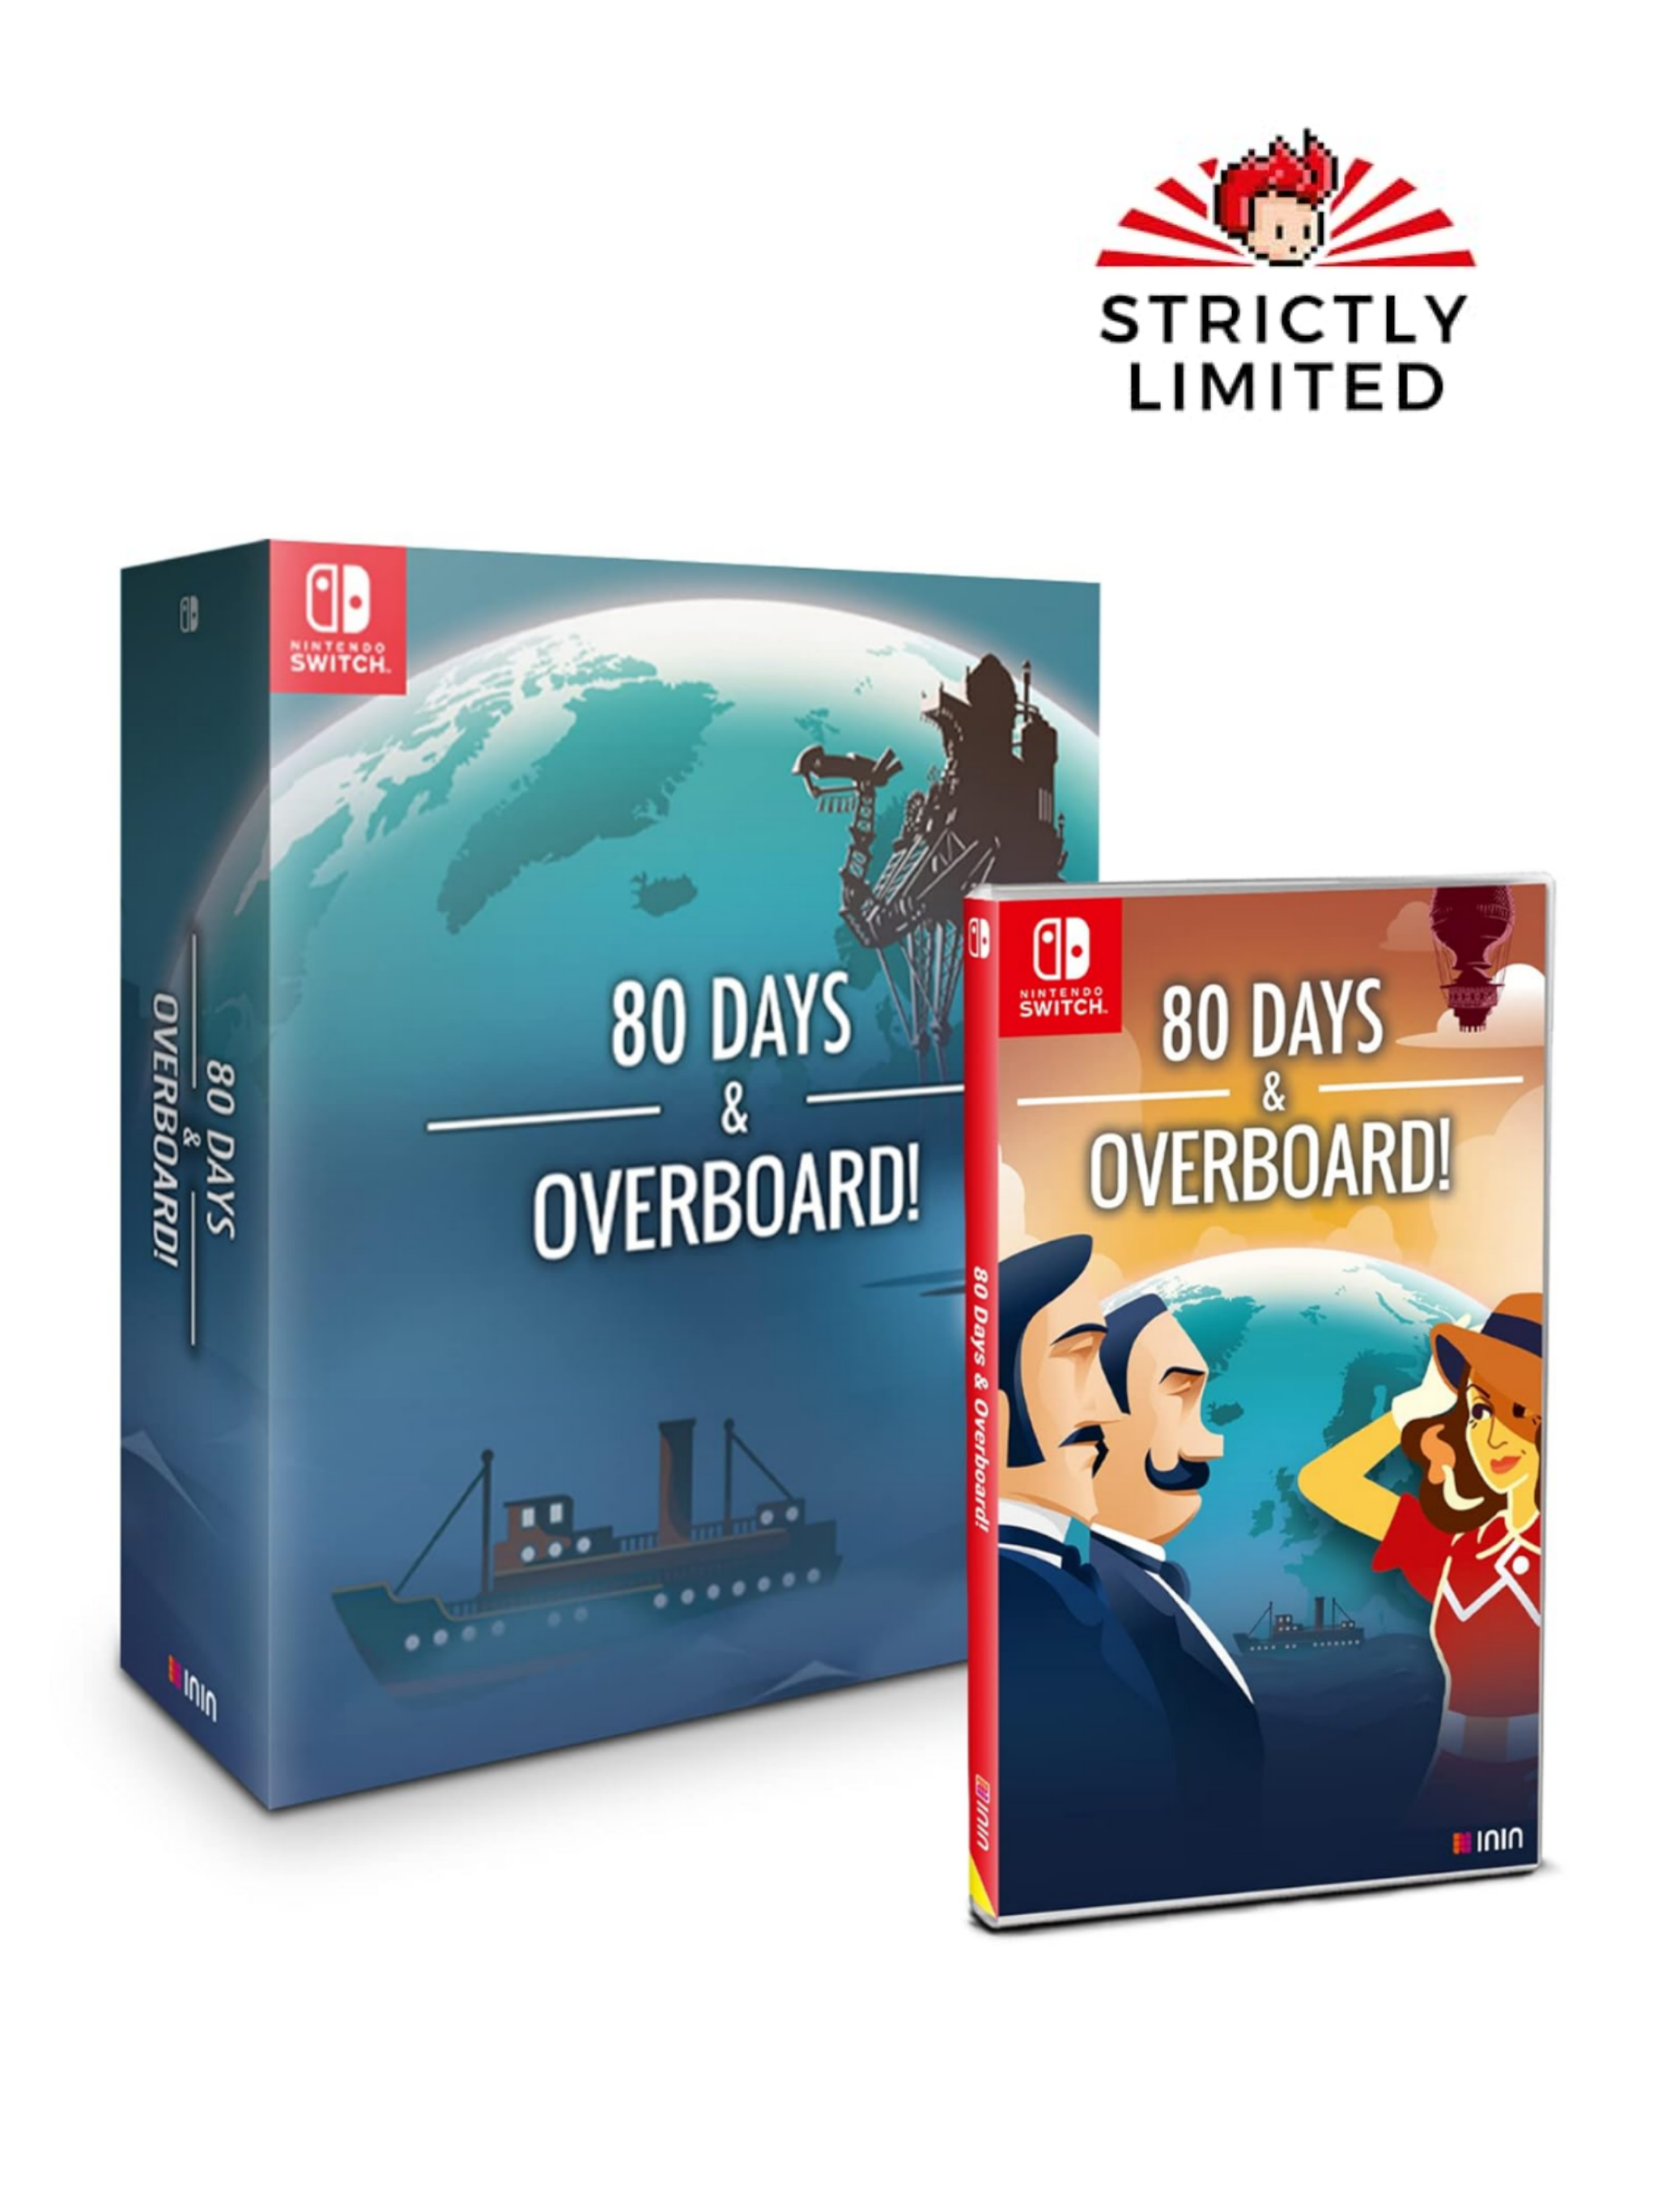 80 Days & Overboard! Special Limited Edition Switch